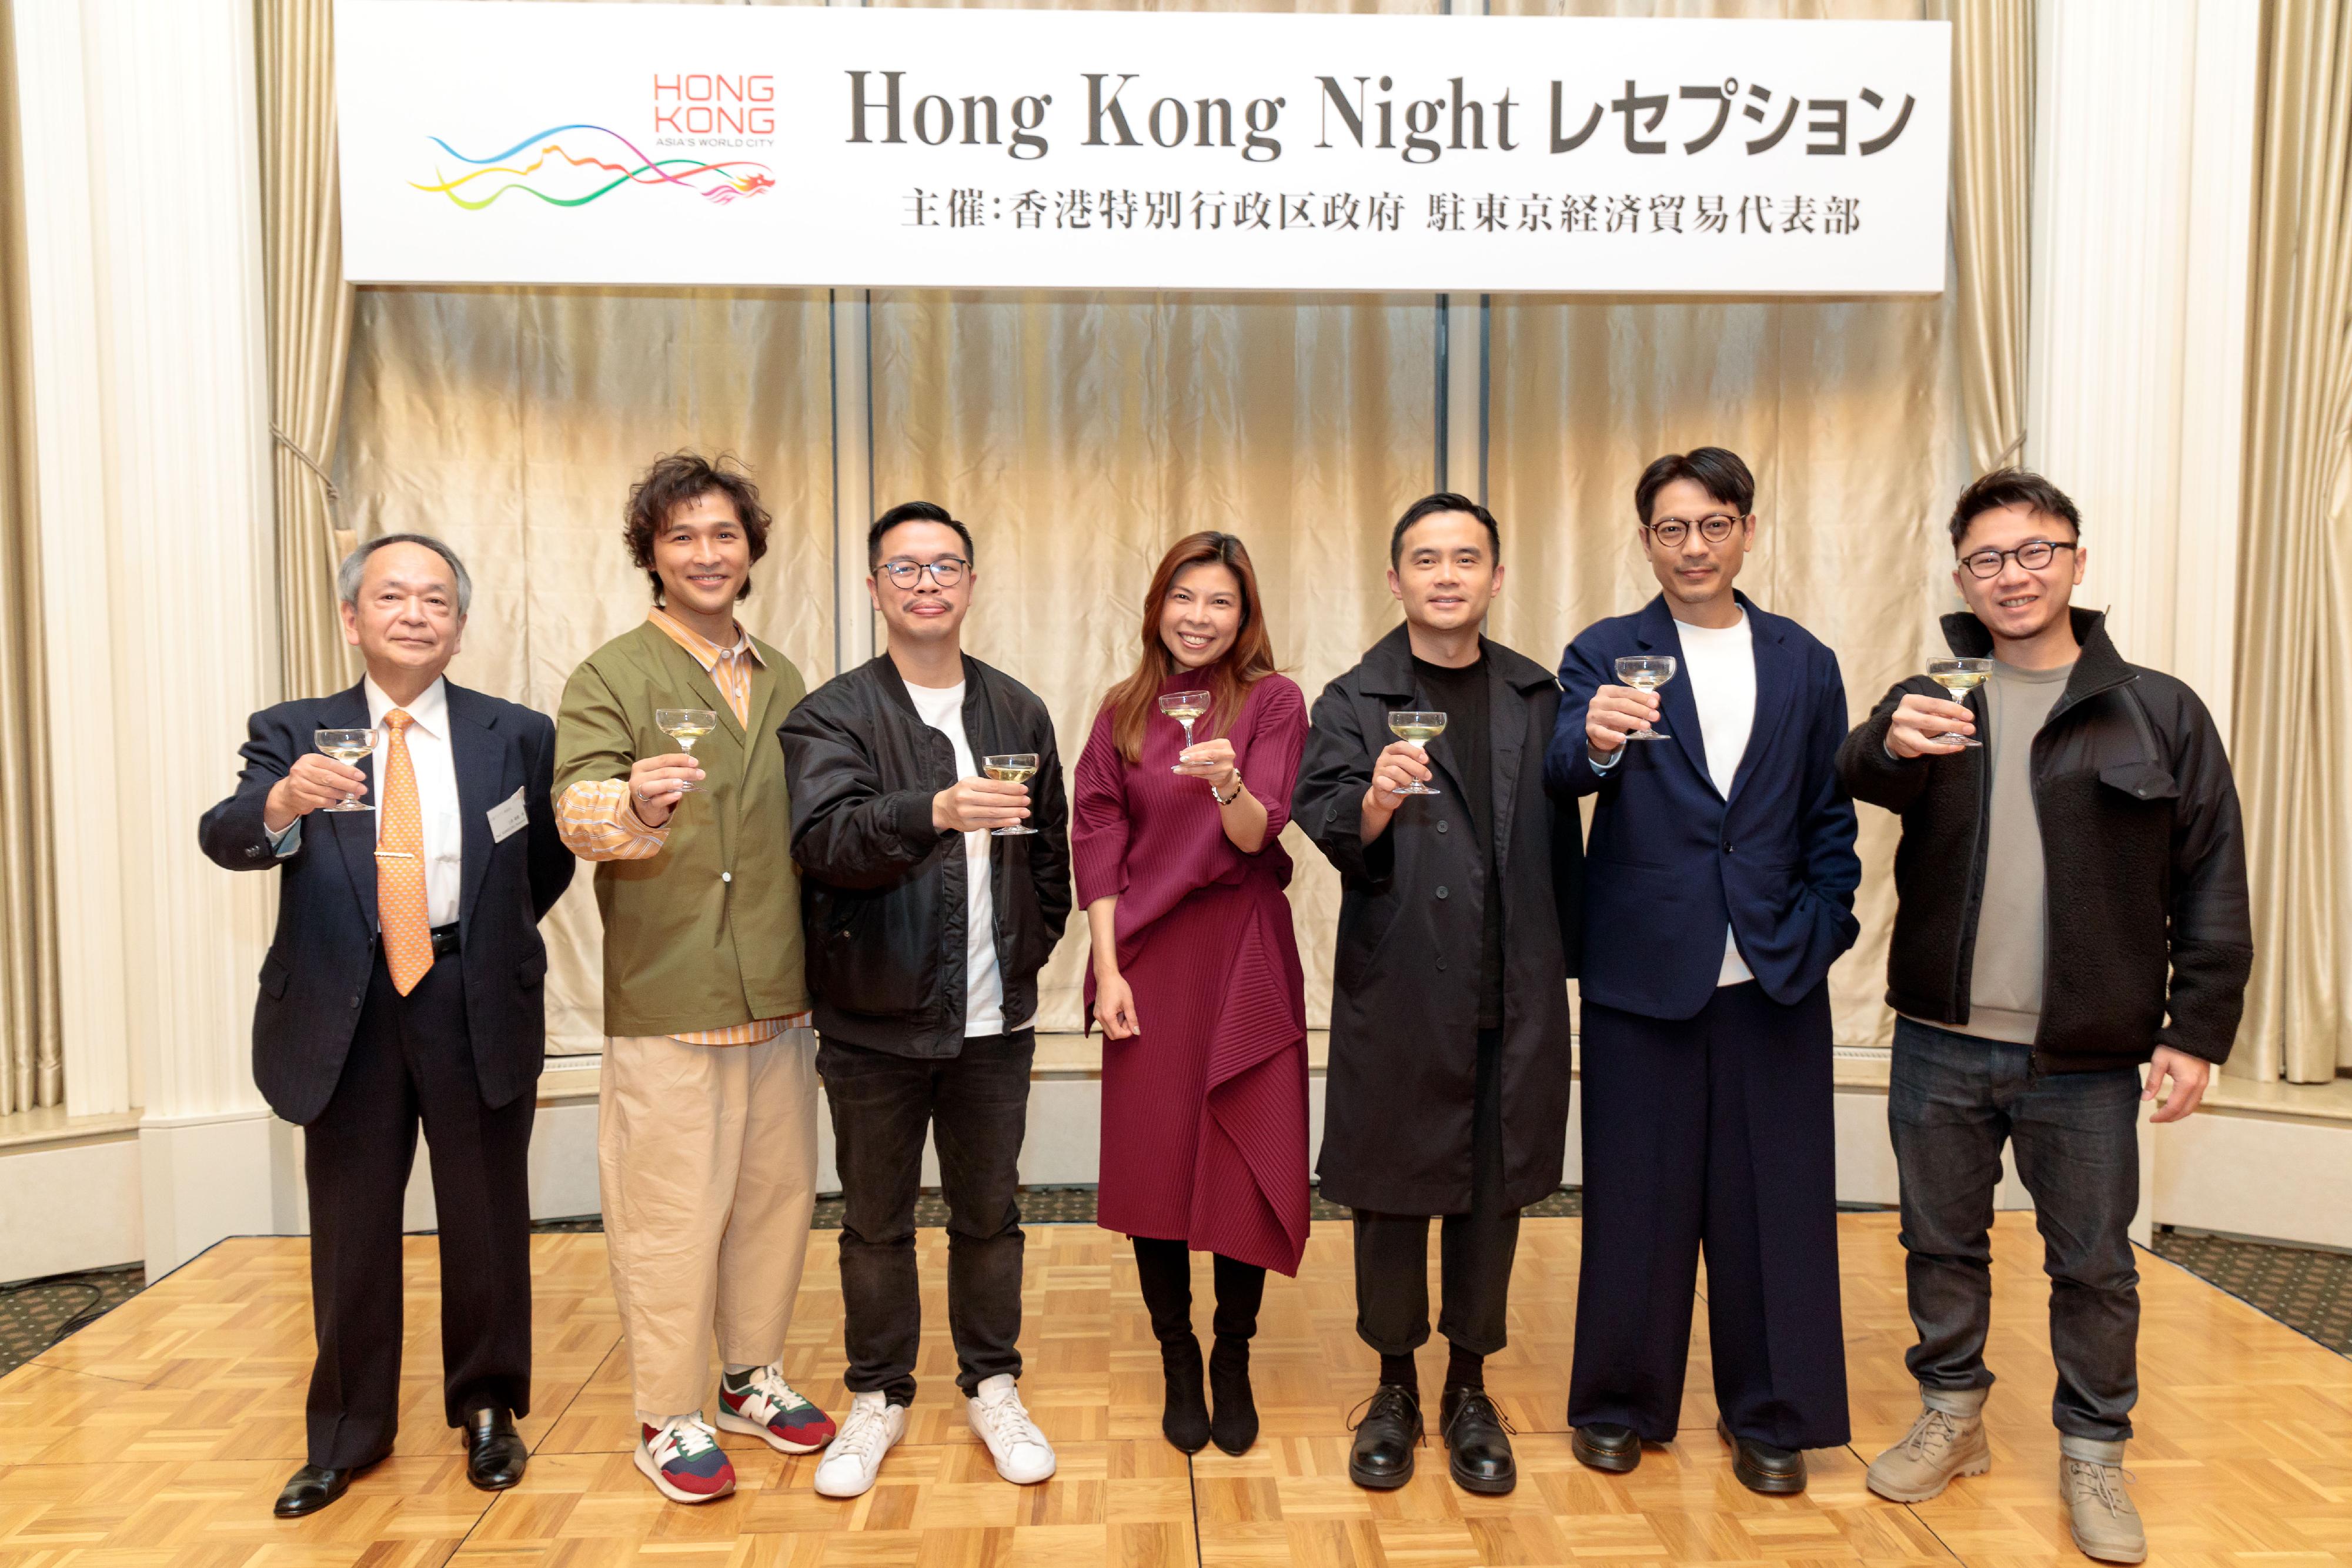 The "Hong Kong Gala Screening" featuring the Hong Kong film "Lost Love" was held in Osaka, Japan, tonight (March 16). At the reception held before the screening, the Acting Principal Hong Kong Economic and Trade Representative (Tokyo), Miss Winsome Au, (centre) was joined by the Chairperson of the Osaka Executive Committee for the Promotion of Moving Image Culture, Professor Kamikura Tsuneyuki (first left), and other film talents from Hong Kong.